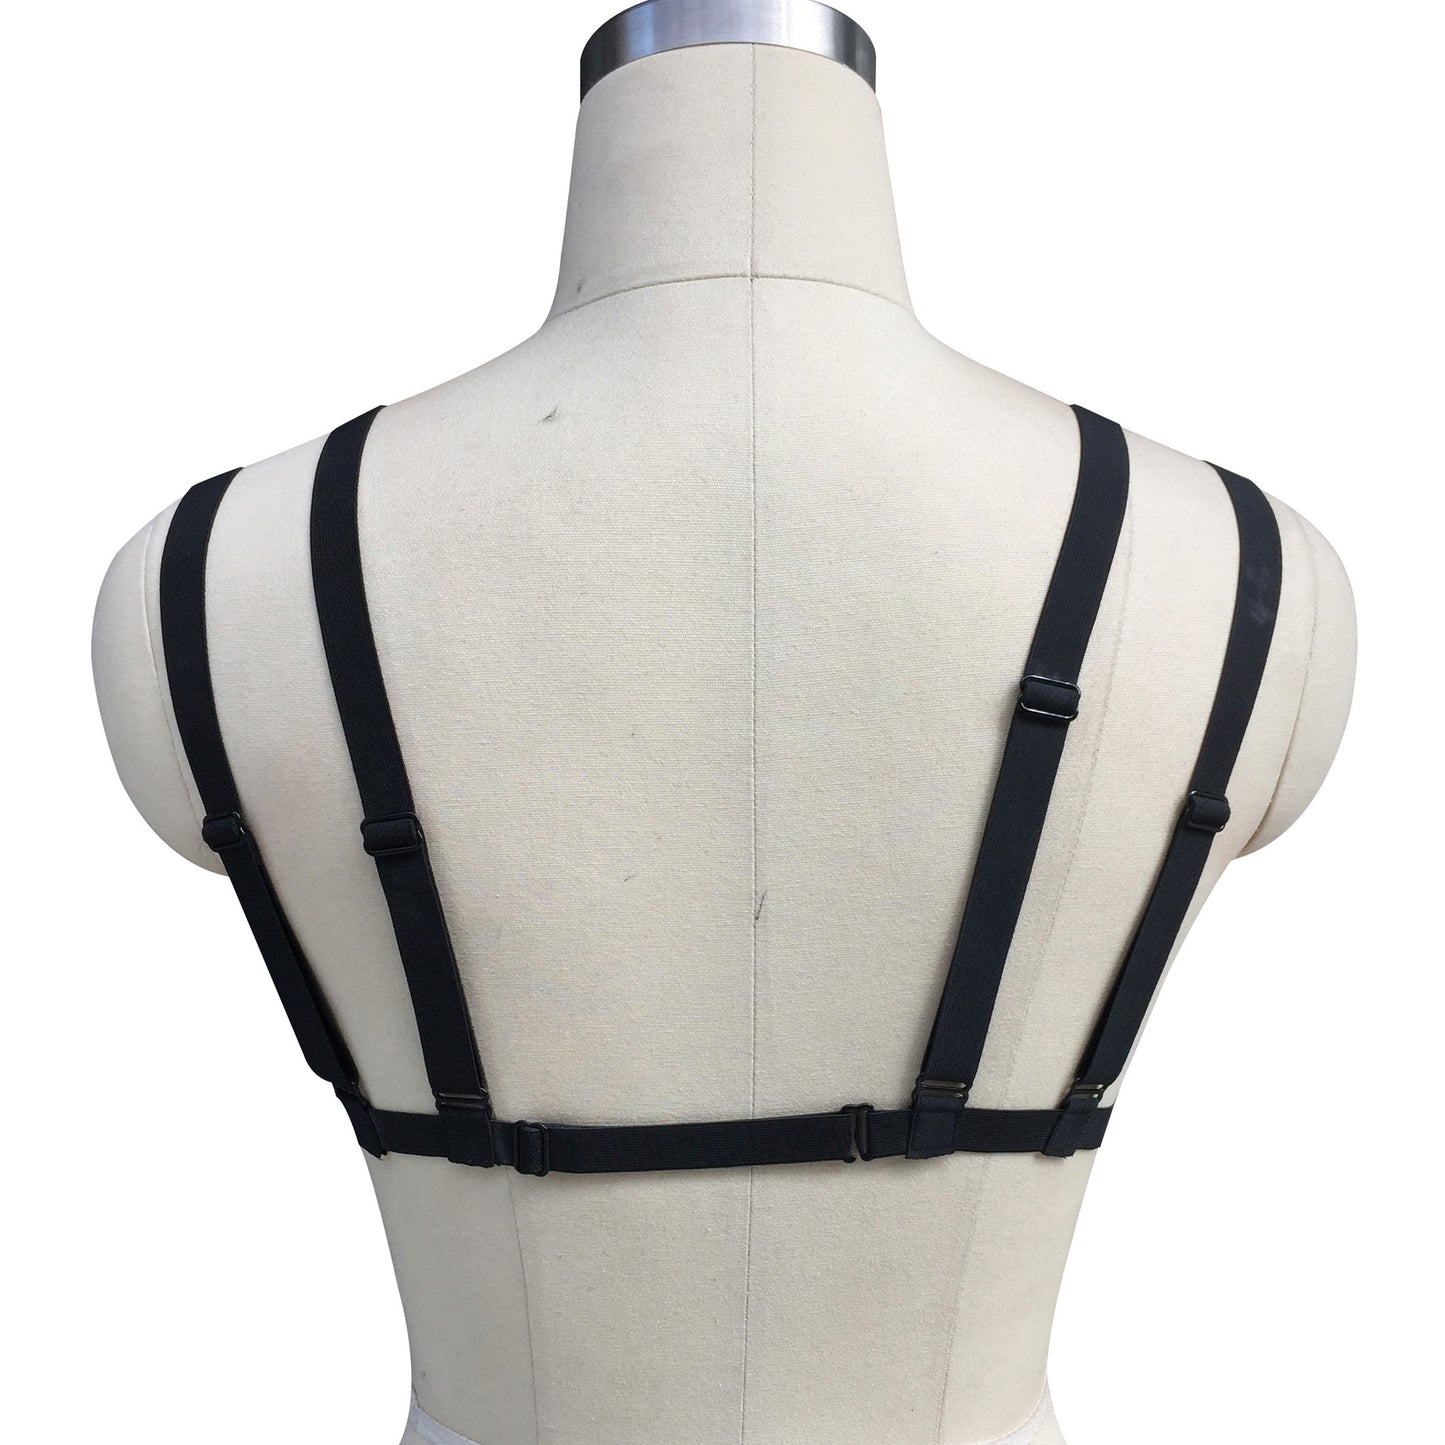 Chubby Harness Bra Submissive Bdsm Lingerie Harness